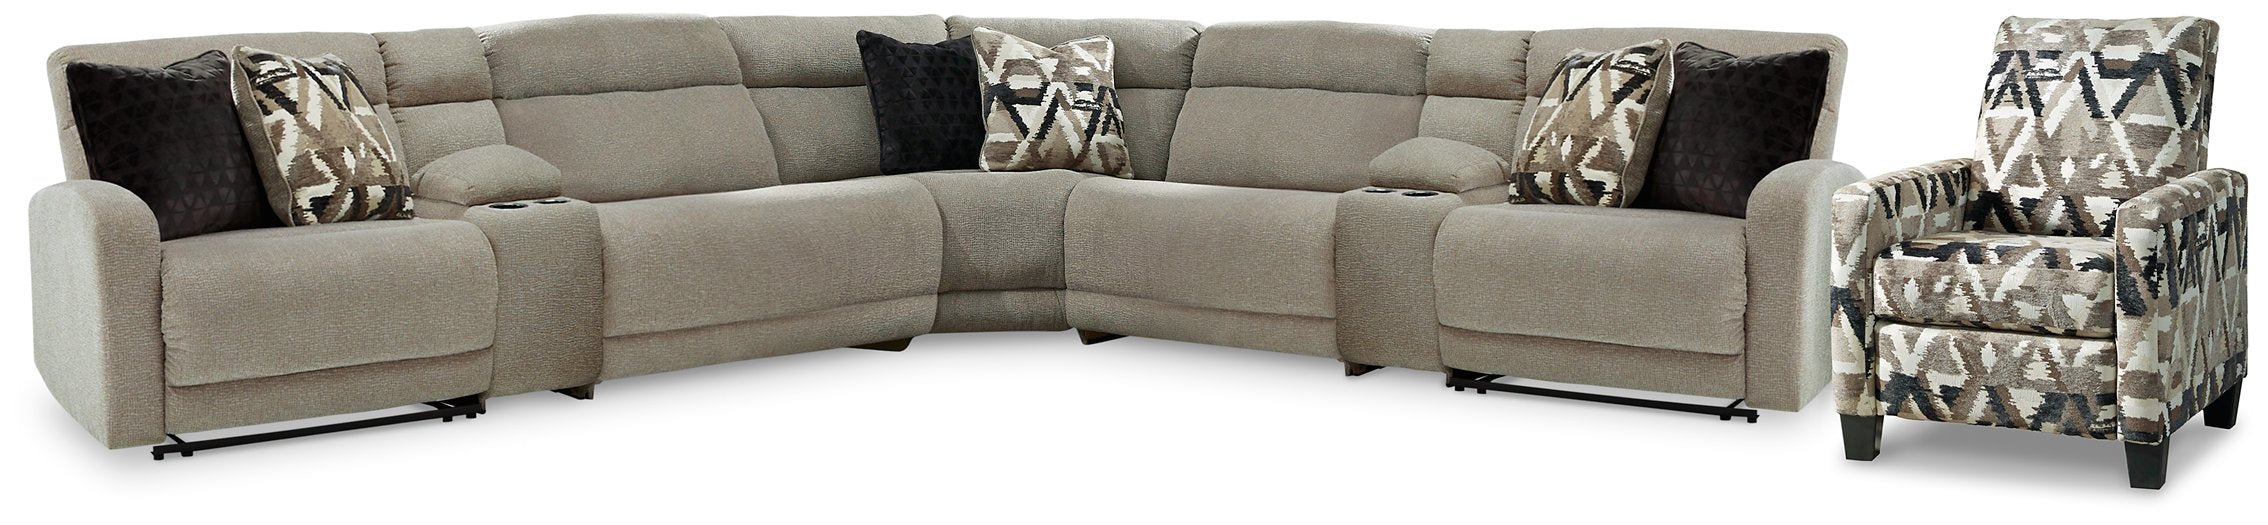 Colleyville 8-Piece Upholstery Package Living Room Set Ashley Furniture